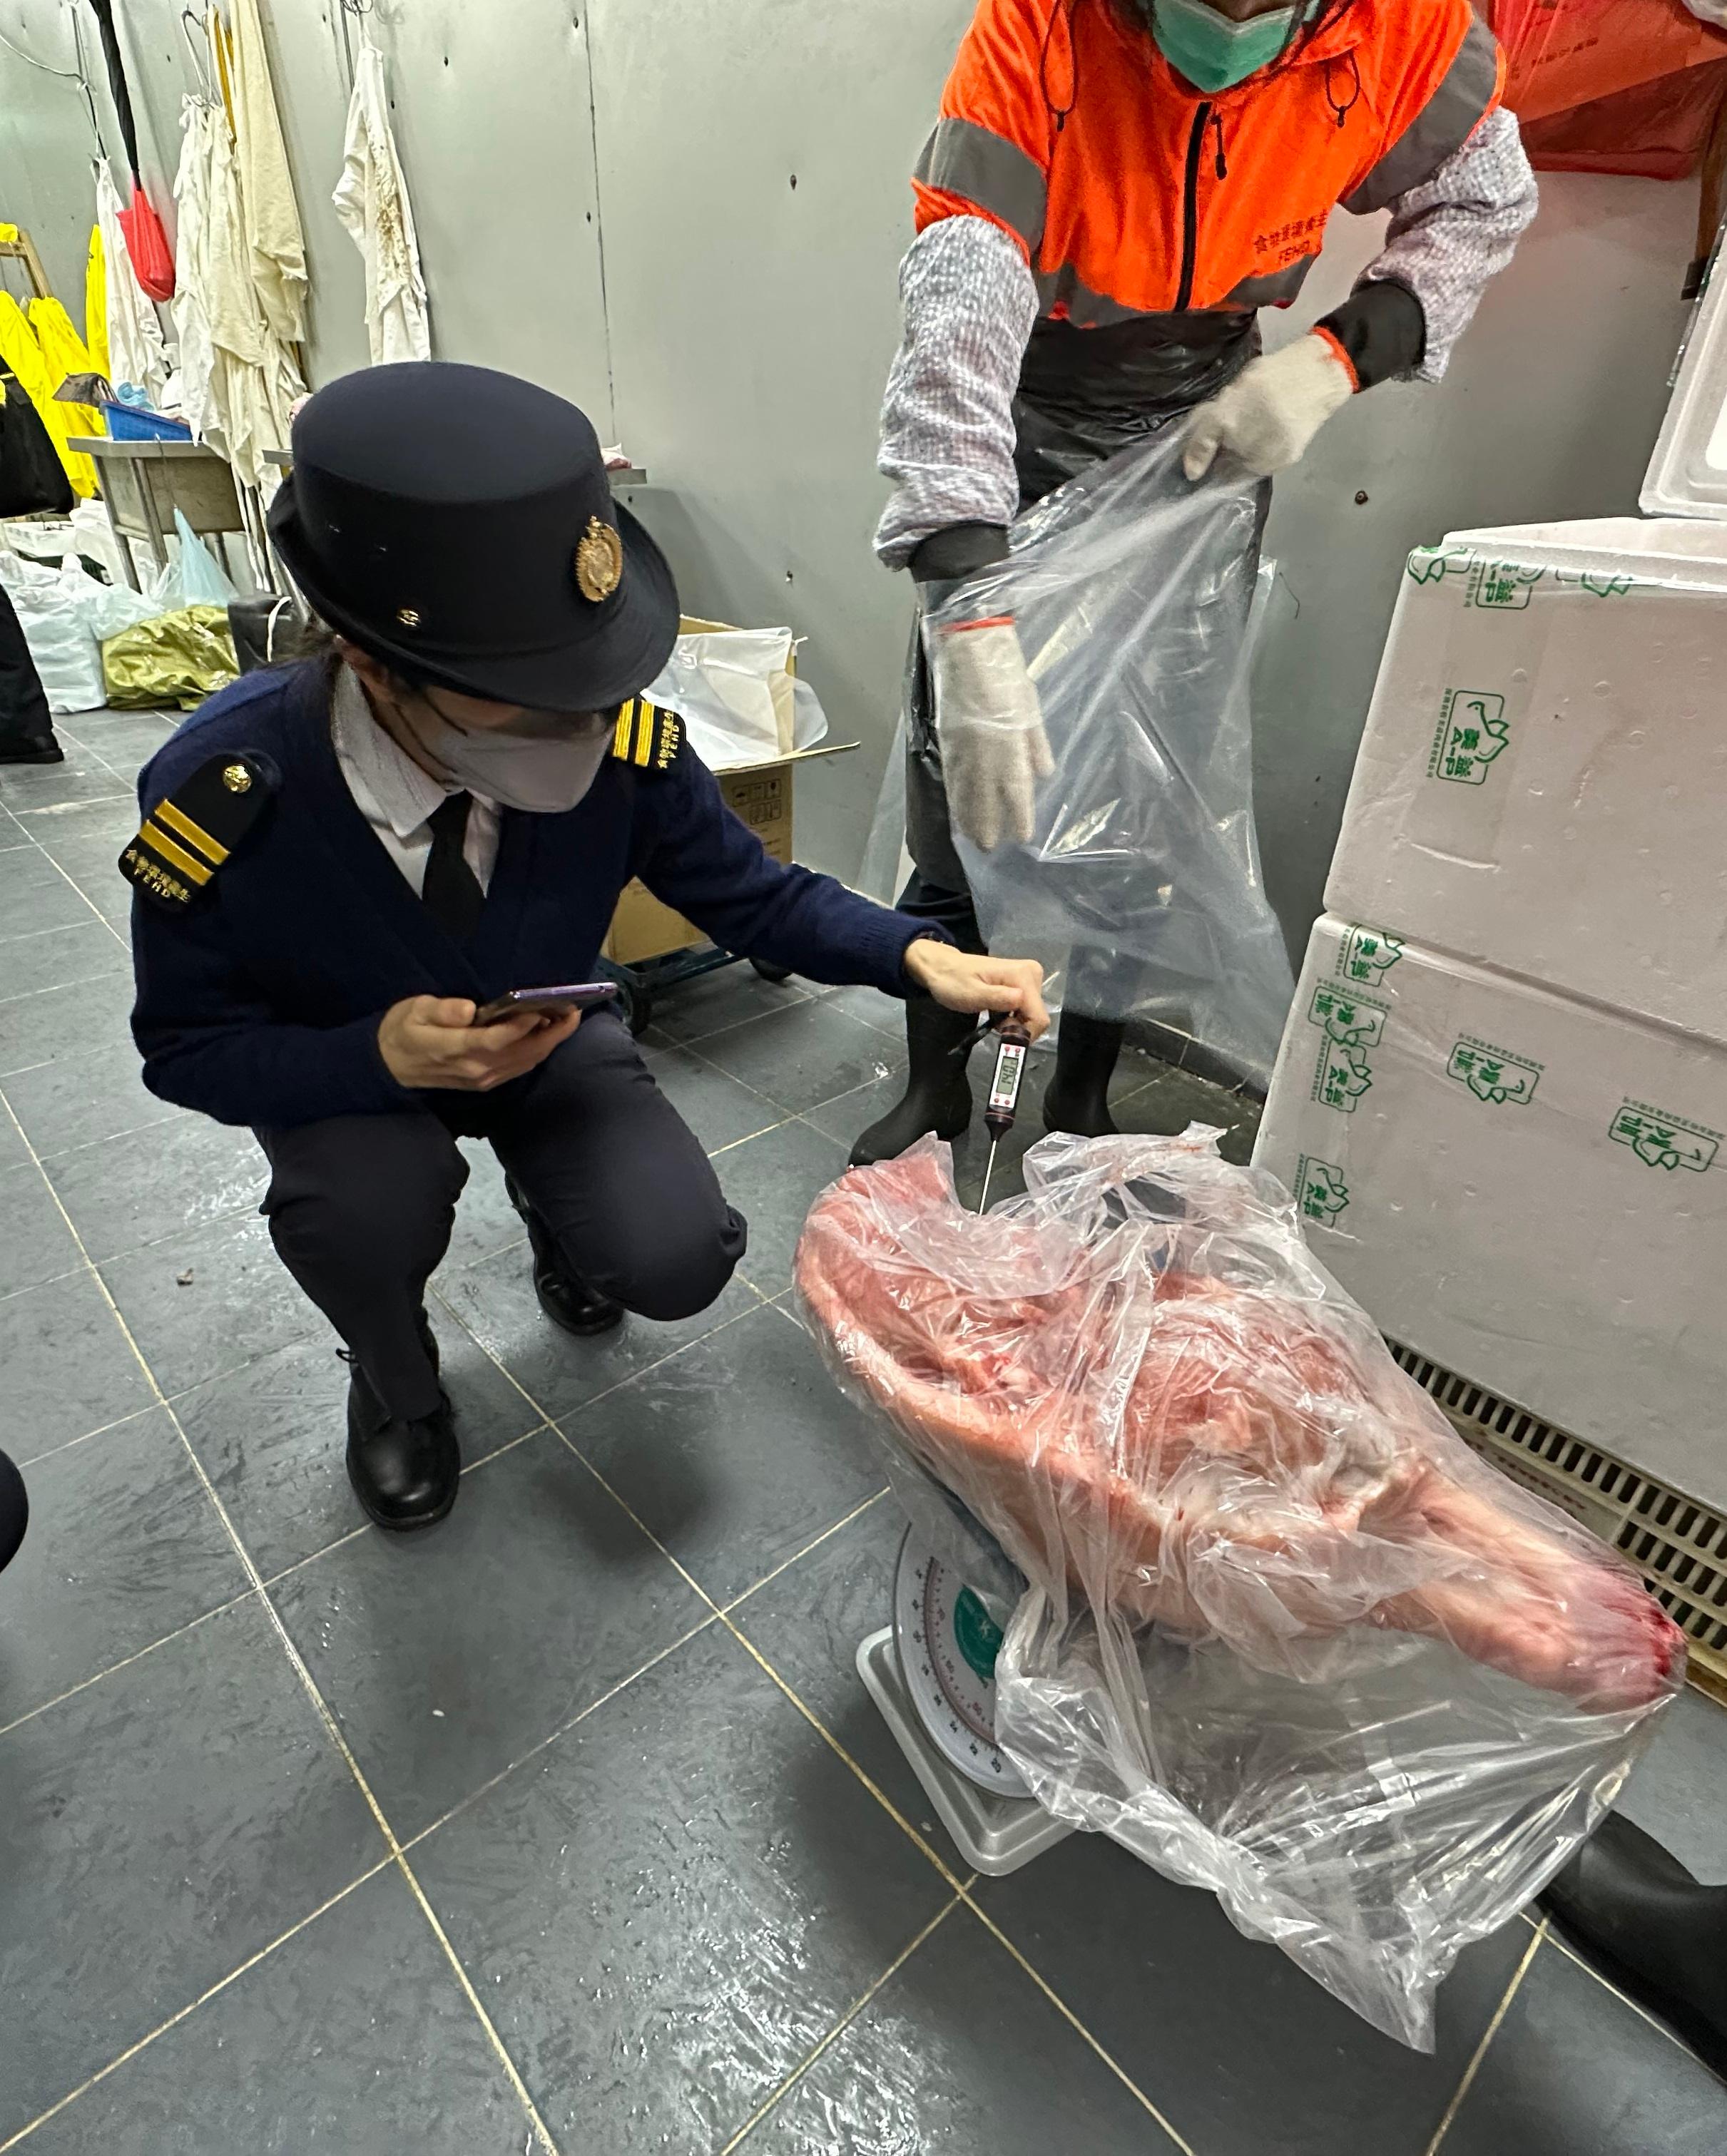 The Food and Environmental Hygiene Department (FEHD) raided a licensed fresh provision shop in Sham Shui Po District suspected of selling chilled meat as fresh meat today (December 16). Photo shows FEHD officer investigating on site.